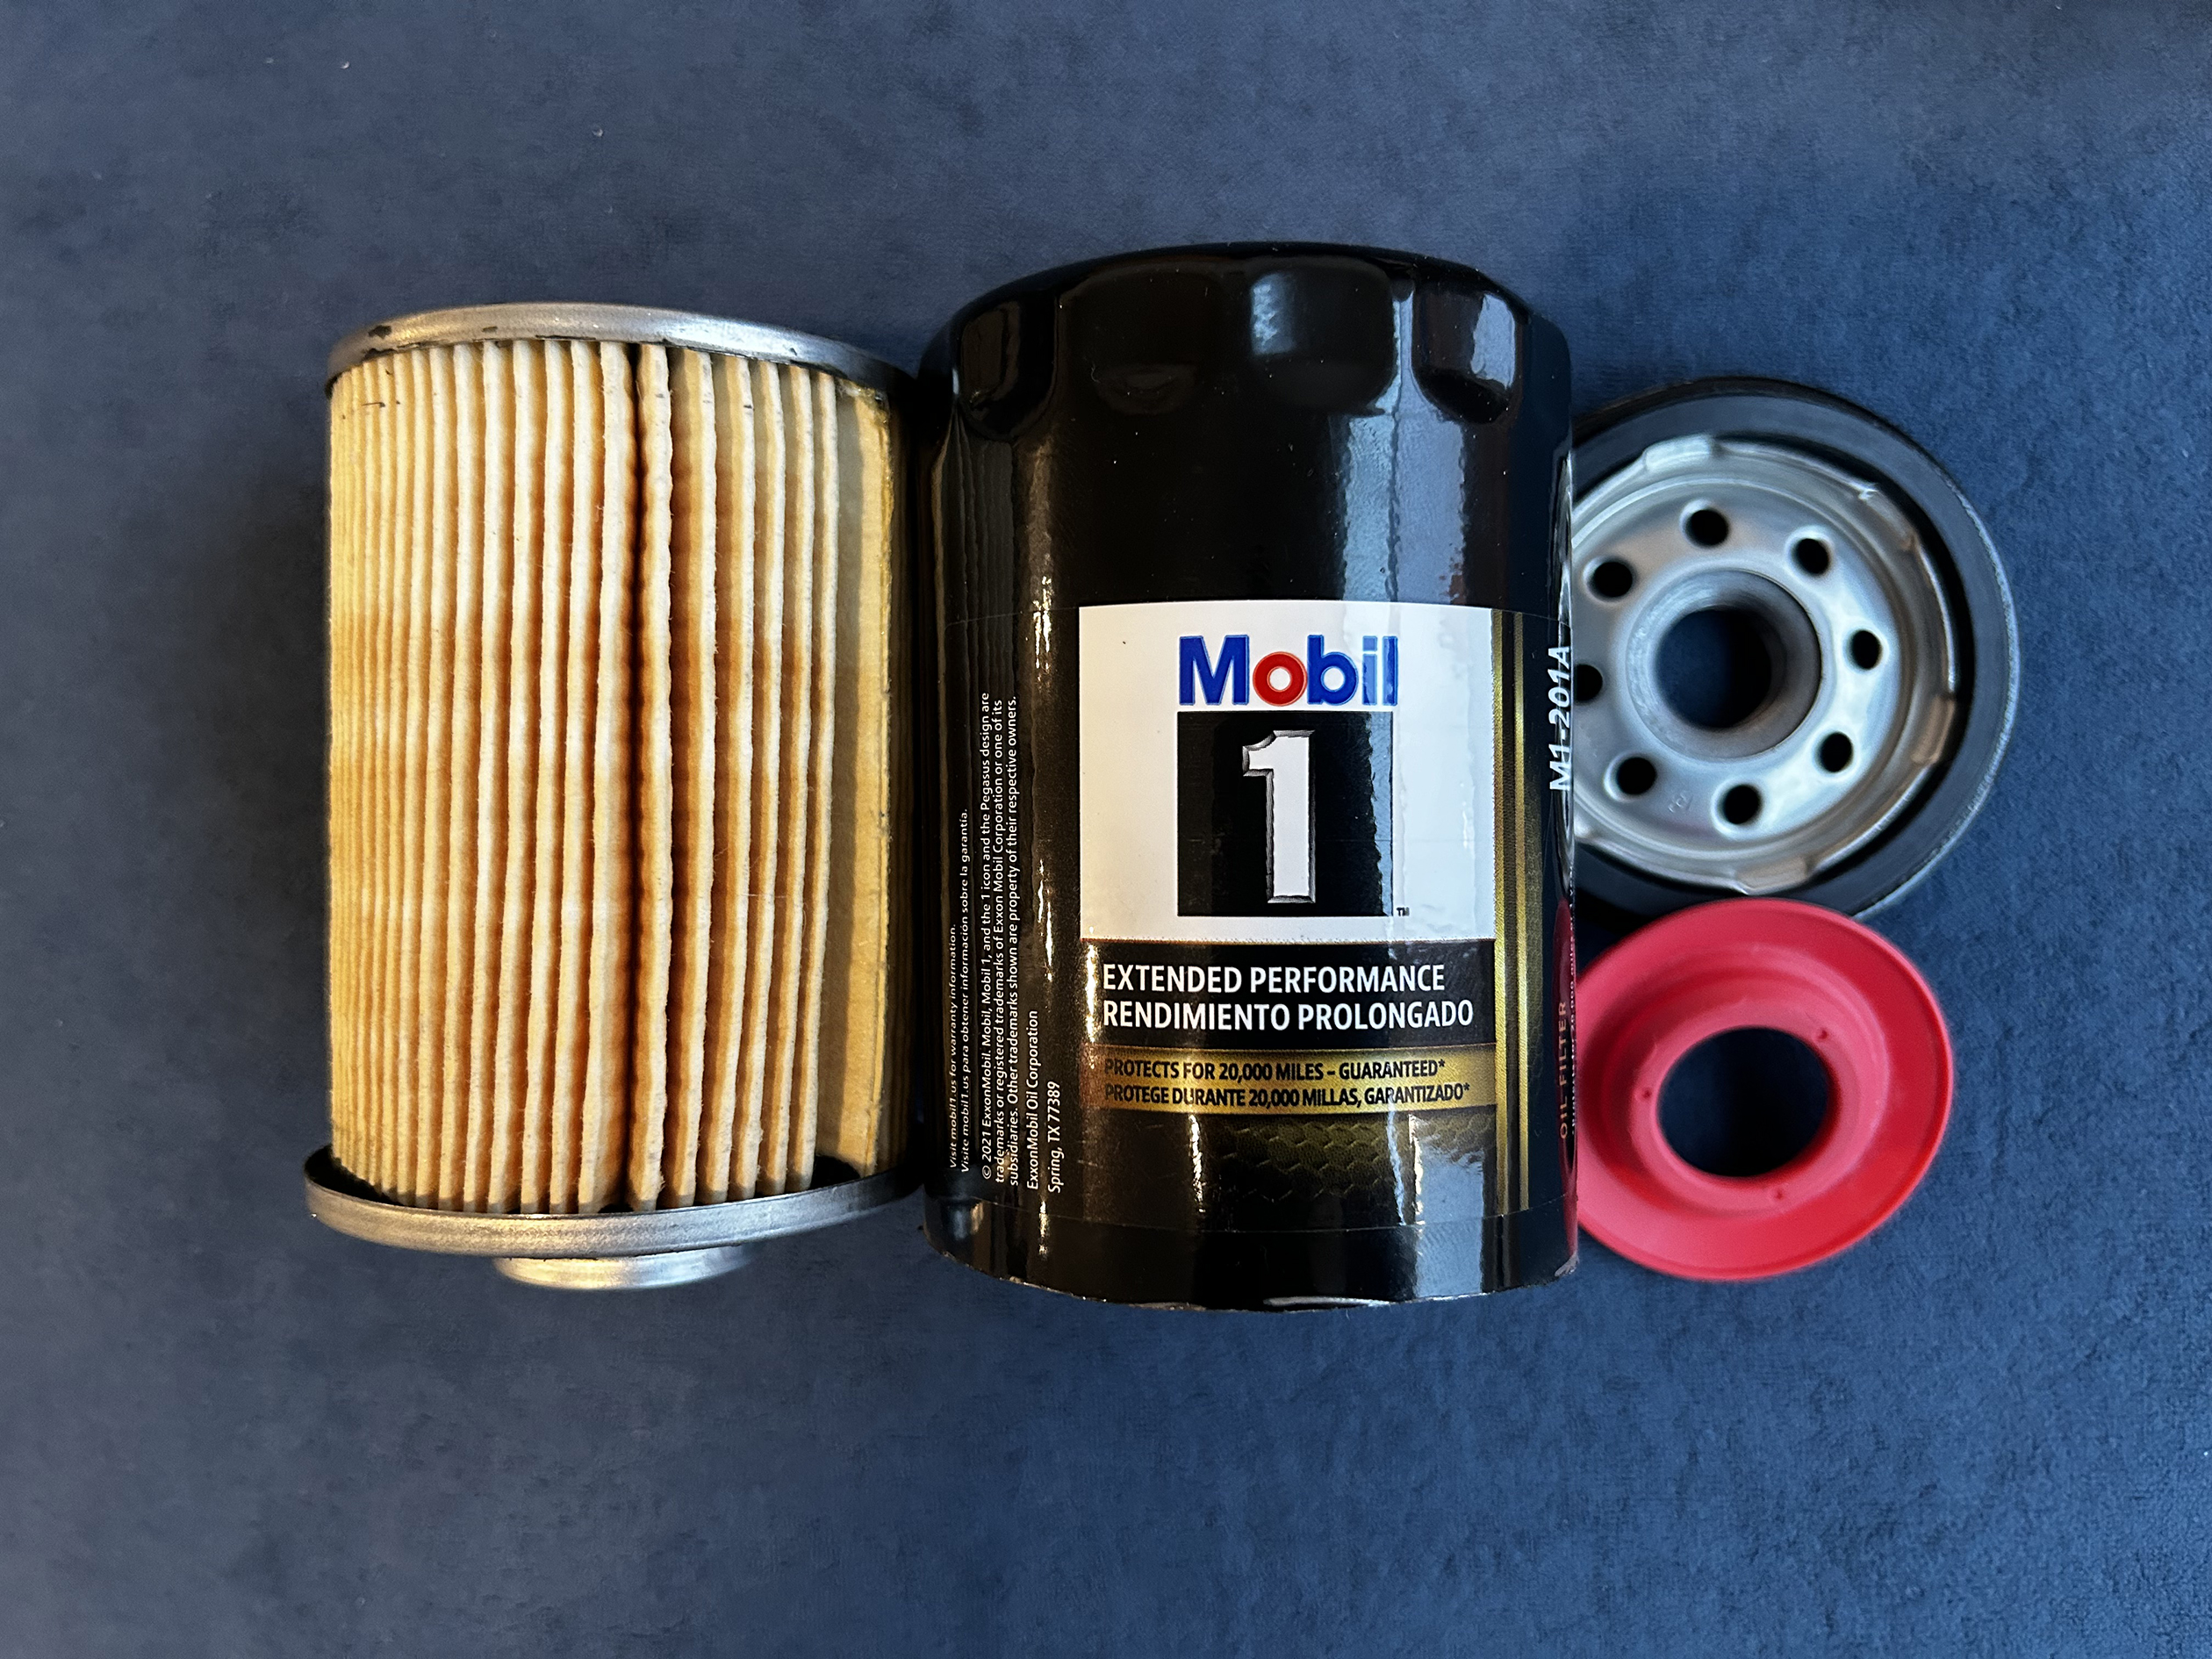 One of the best engine oil filters ; Mobil 1 Oil Filter (Extended Performance), cut open with the parts laid out.